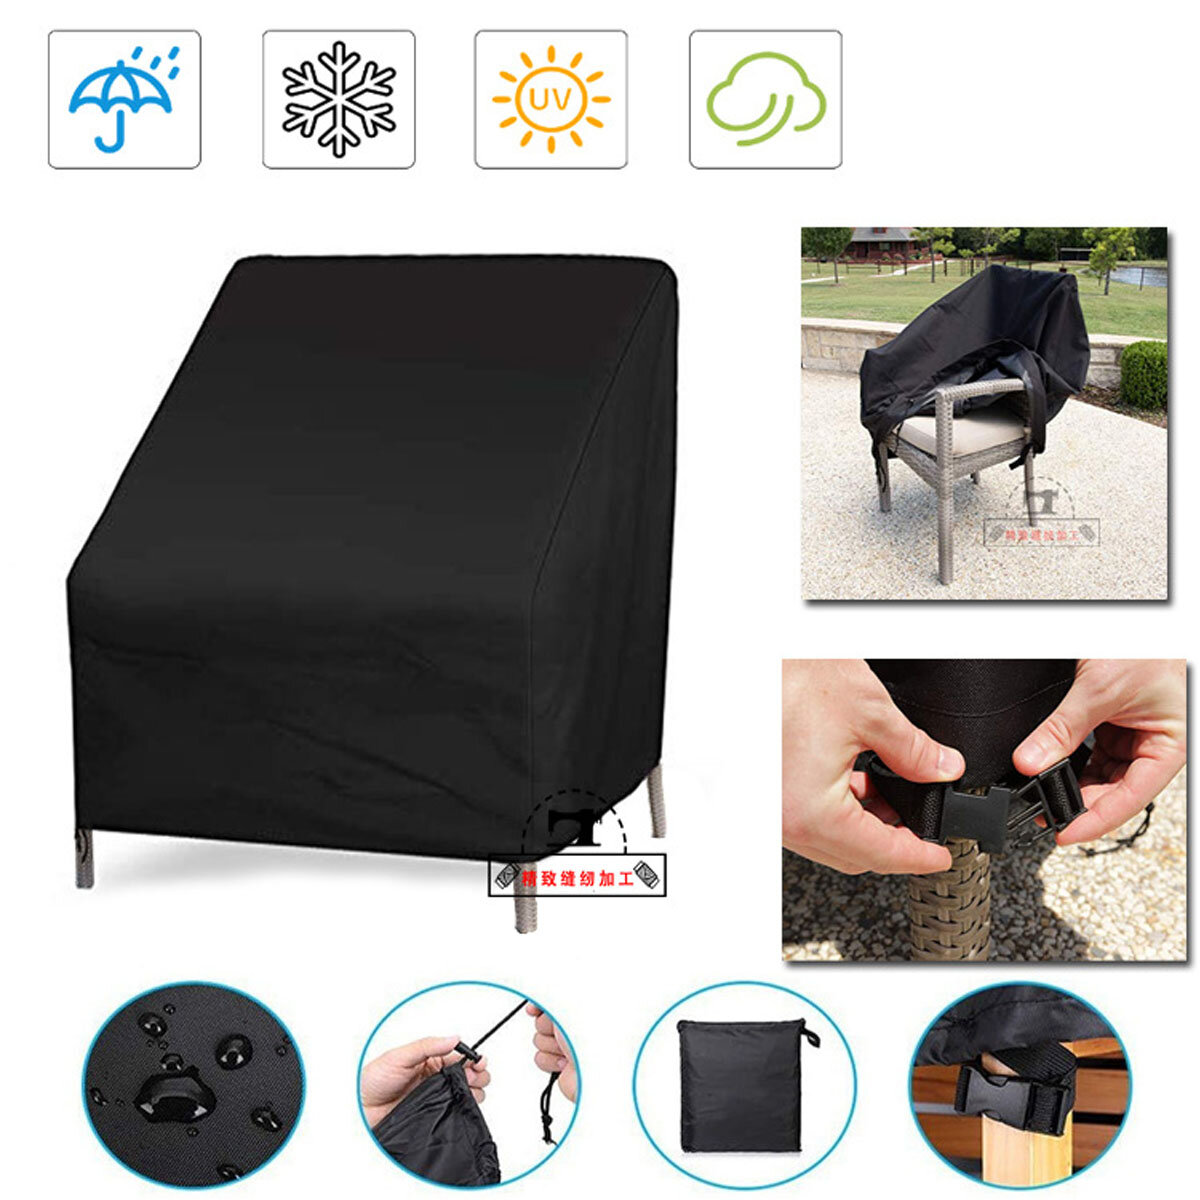 Waterproof Protective Oxford Chair Sofa Rattan Table Cube Chair Furniture Cover 